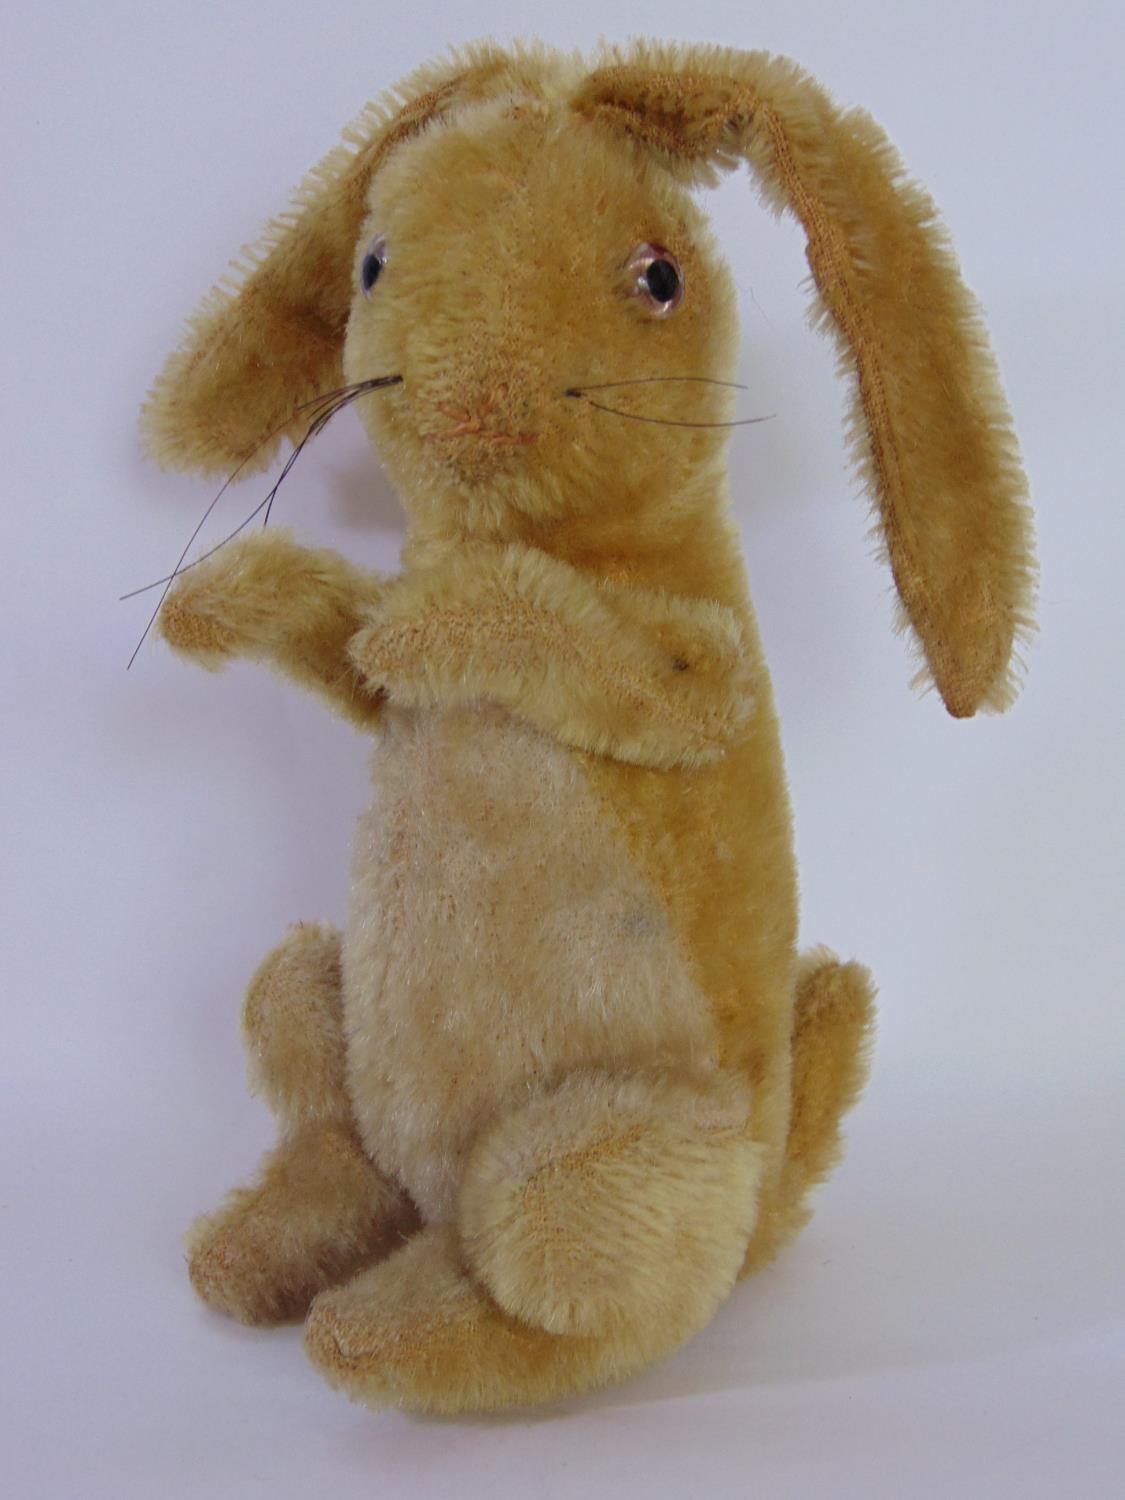 Vintage rabbit, (possibly Steiff but no pin), with glass eyes, golden fur, whiskers, articulating